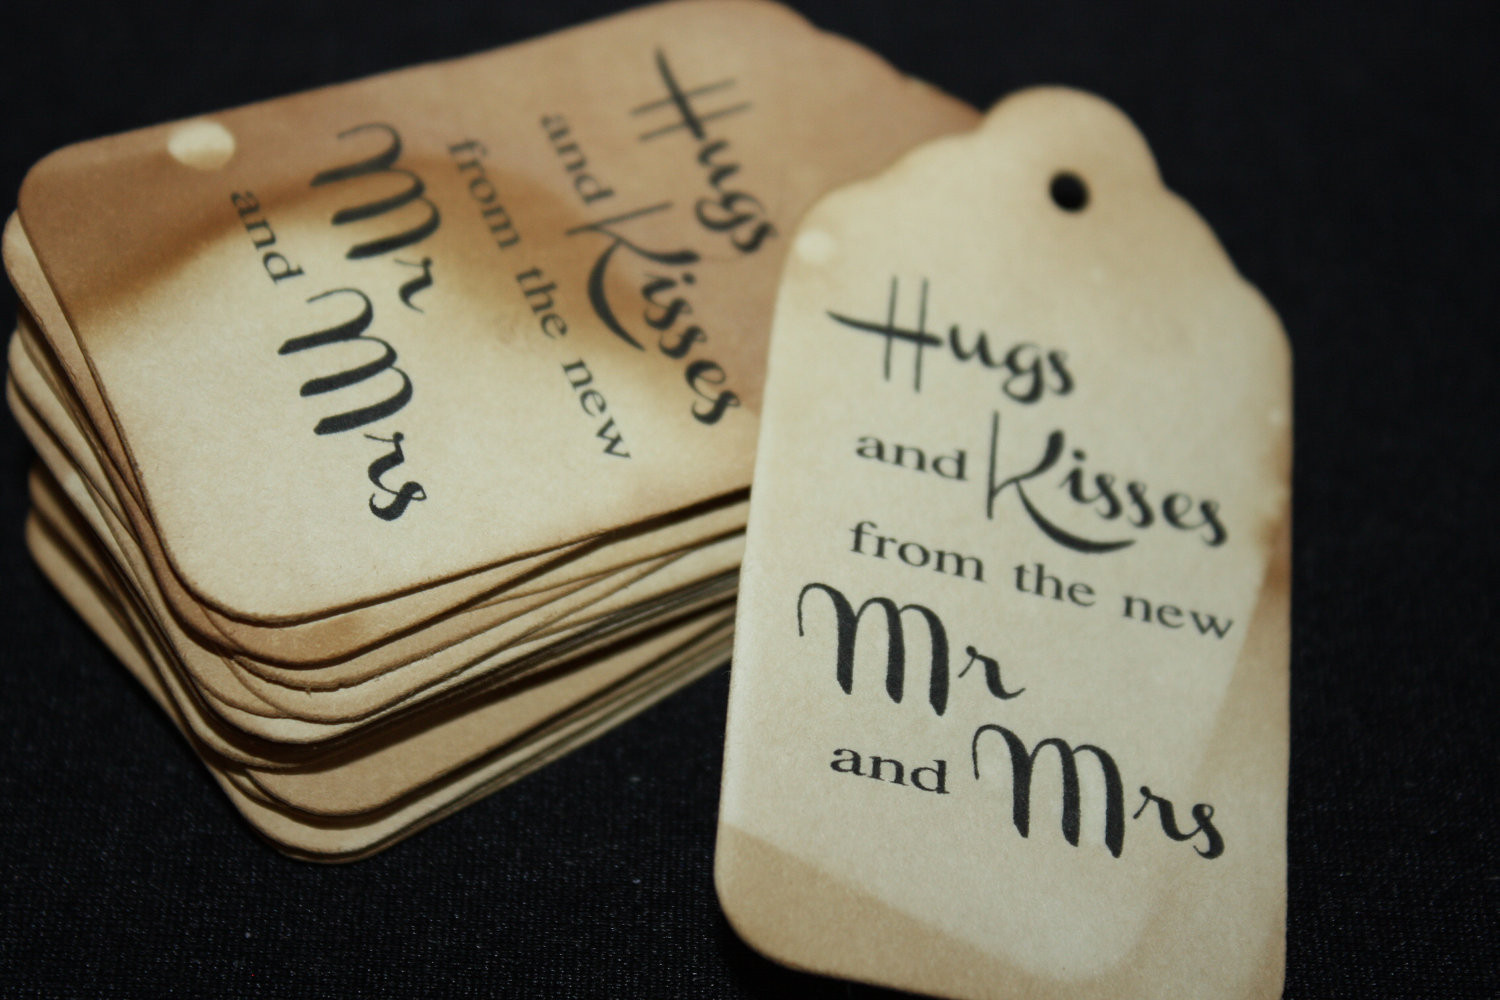 Wedding Favor Tags
 100 Wedding Favor Tags Hugs and Kisses from the New Mr and Mrs